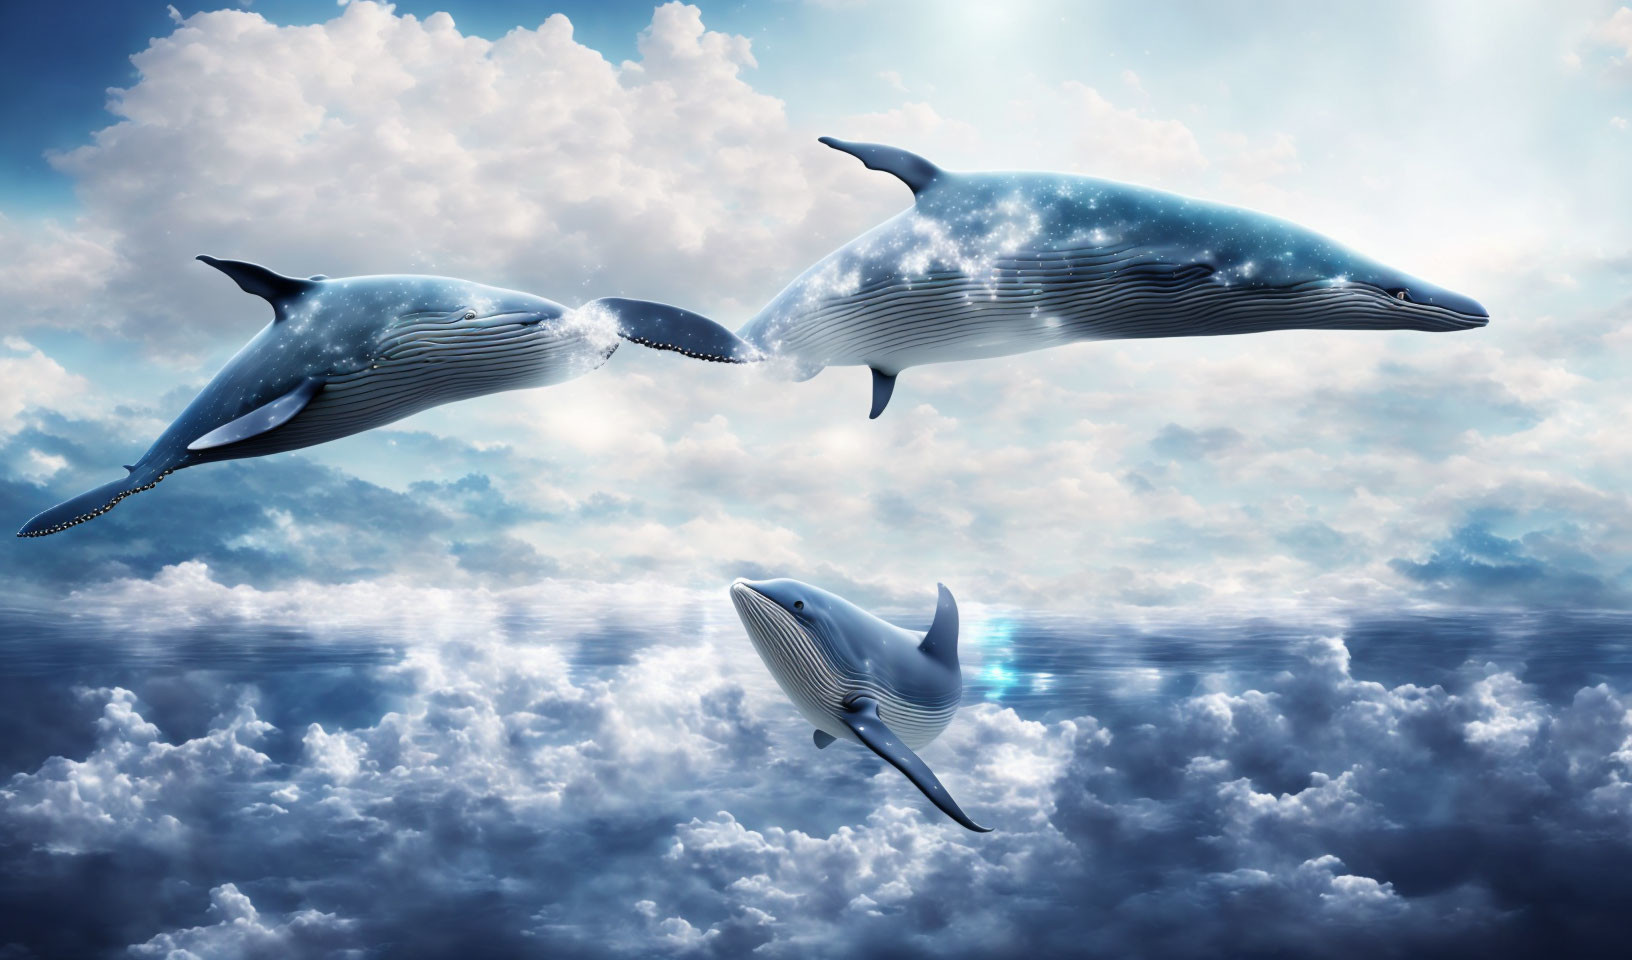 Surreal whales with starry sky textures above clouds in blue sky